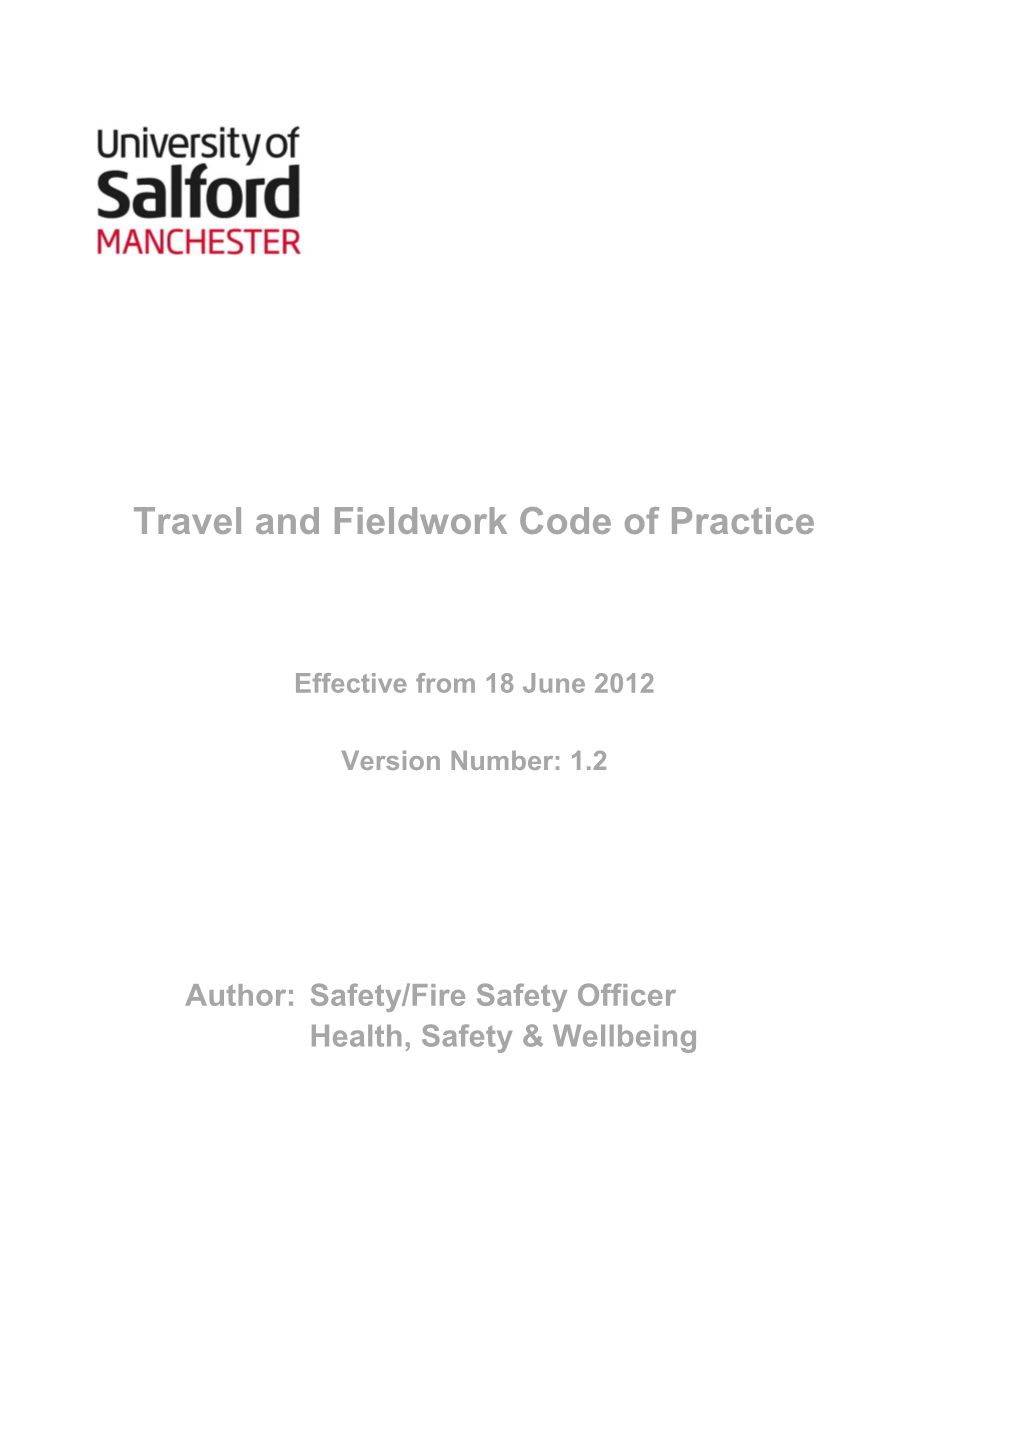 University of Salford Travel and Fieldwork Code of Practice V1.2